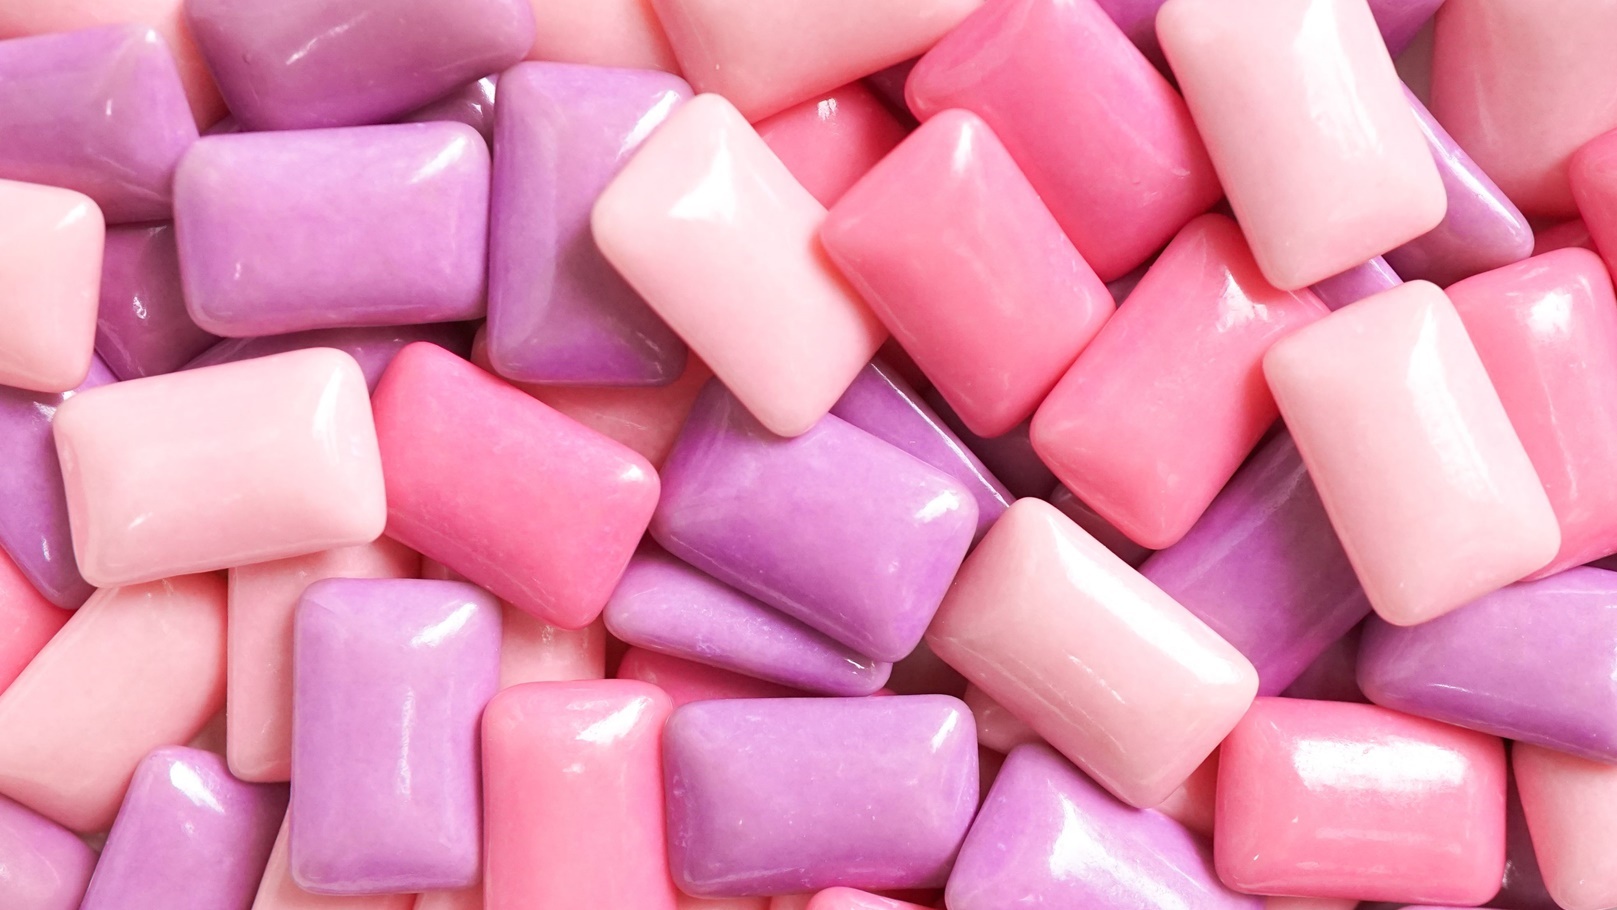 gum-a-various-shades-of-pink-and-purple-gum-for-royalty-free-image-1597017115